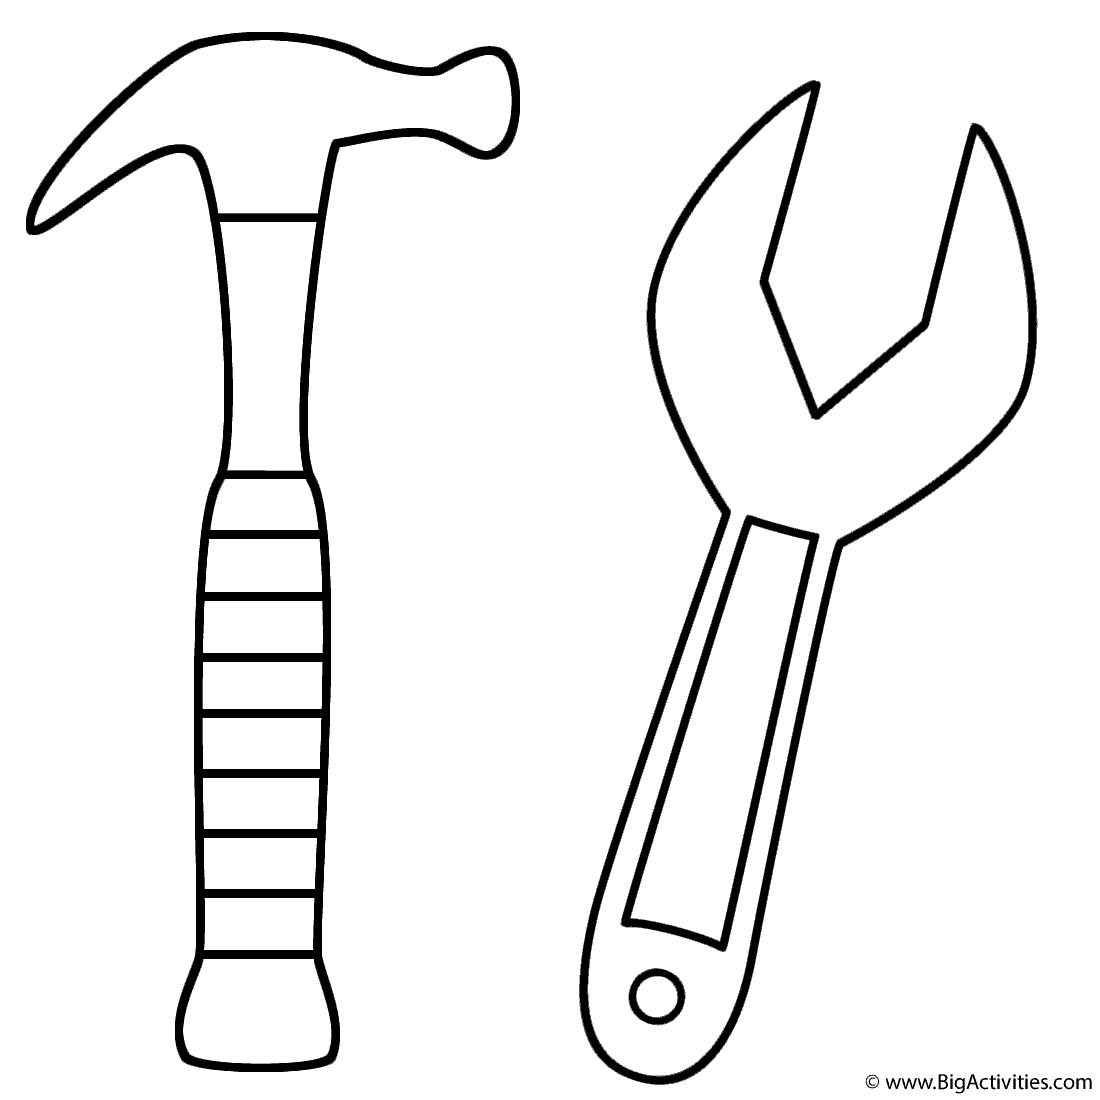 Hammer and Wrench - Coloring Page (Tools)